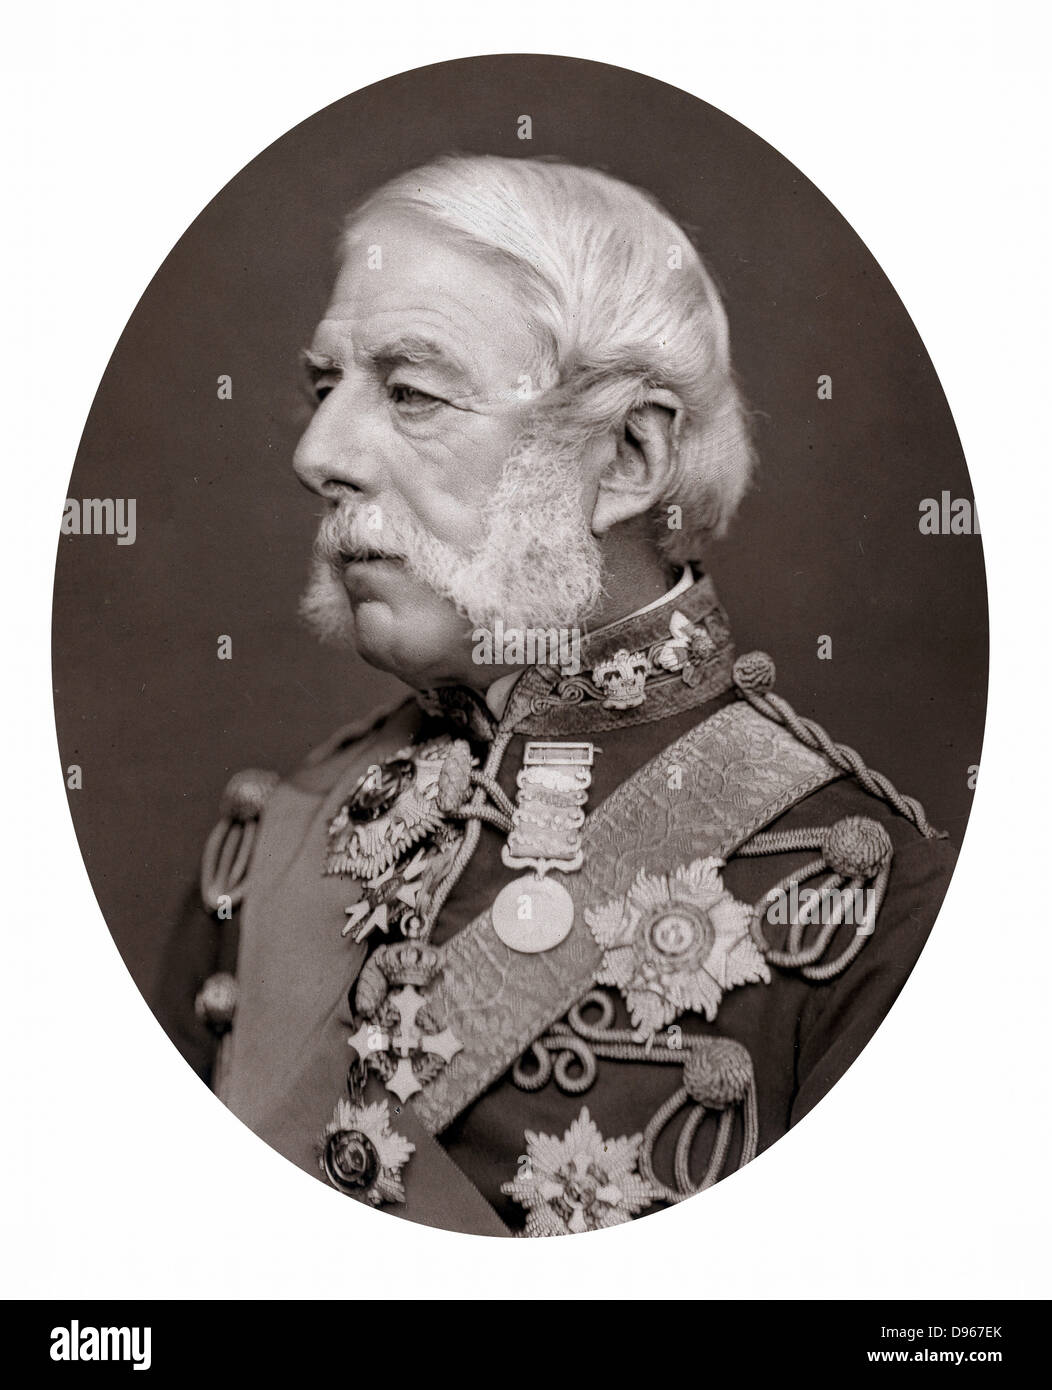 Richard Airey,  Baron Airey (1803-1881) English soldier; Quartermaster General to the Crimean army 1854-1855; Governor of Gibraltar 1865-1870. Photograph published 1875. Woodburytype Stock Photo